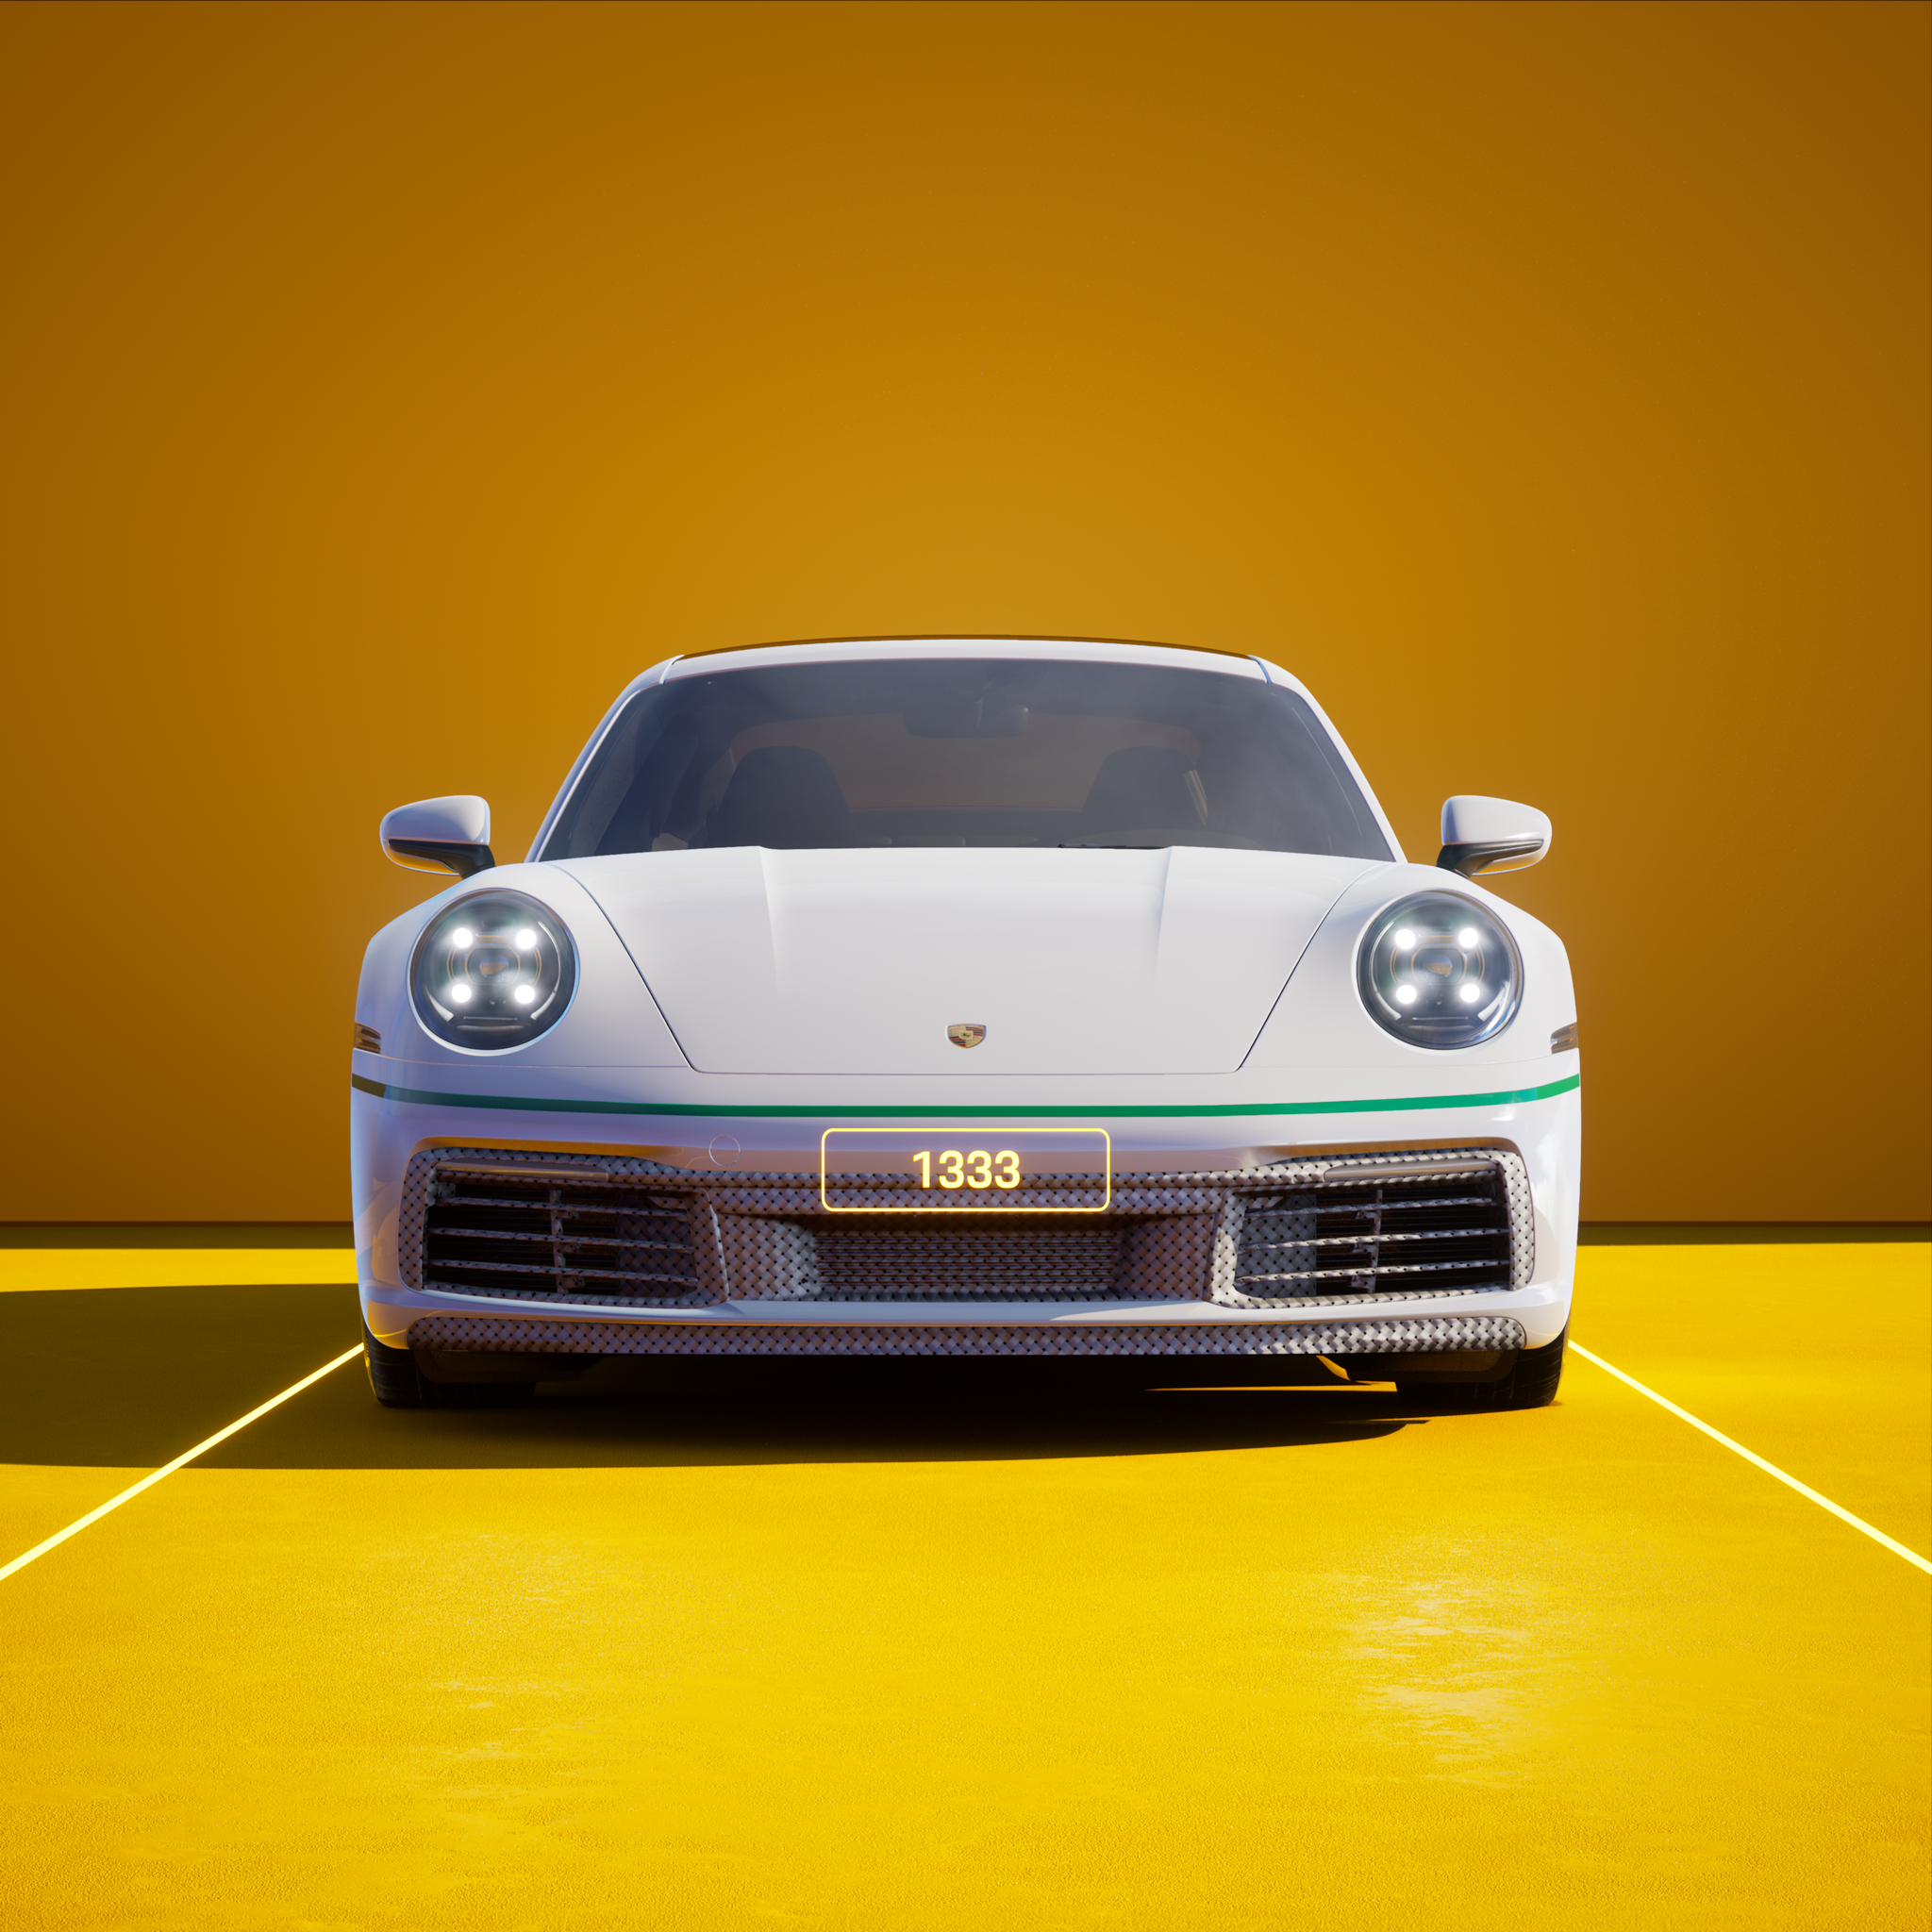 The PORSCHΞ 911 1333 image in phase